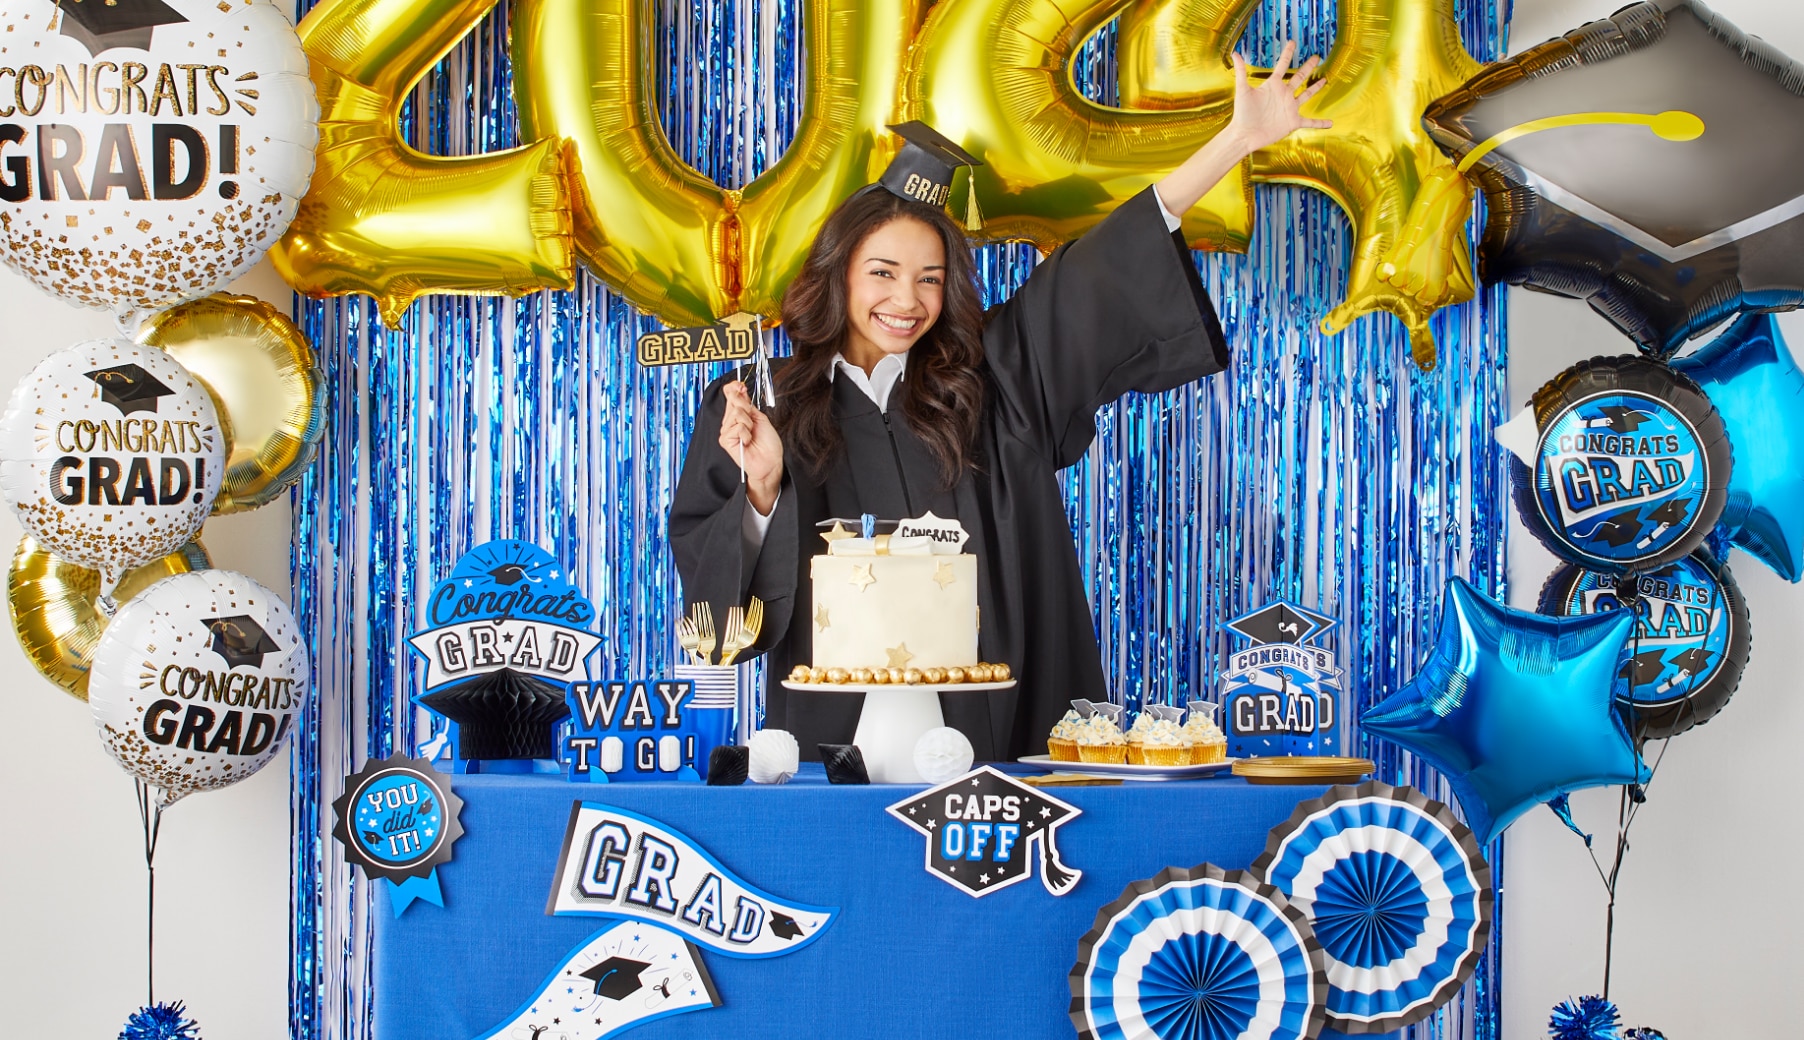 A woman wearing a graduation cap and gown while holding a sign that says 'grad', surrounded by graduation themed balloons and table decor.